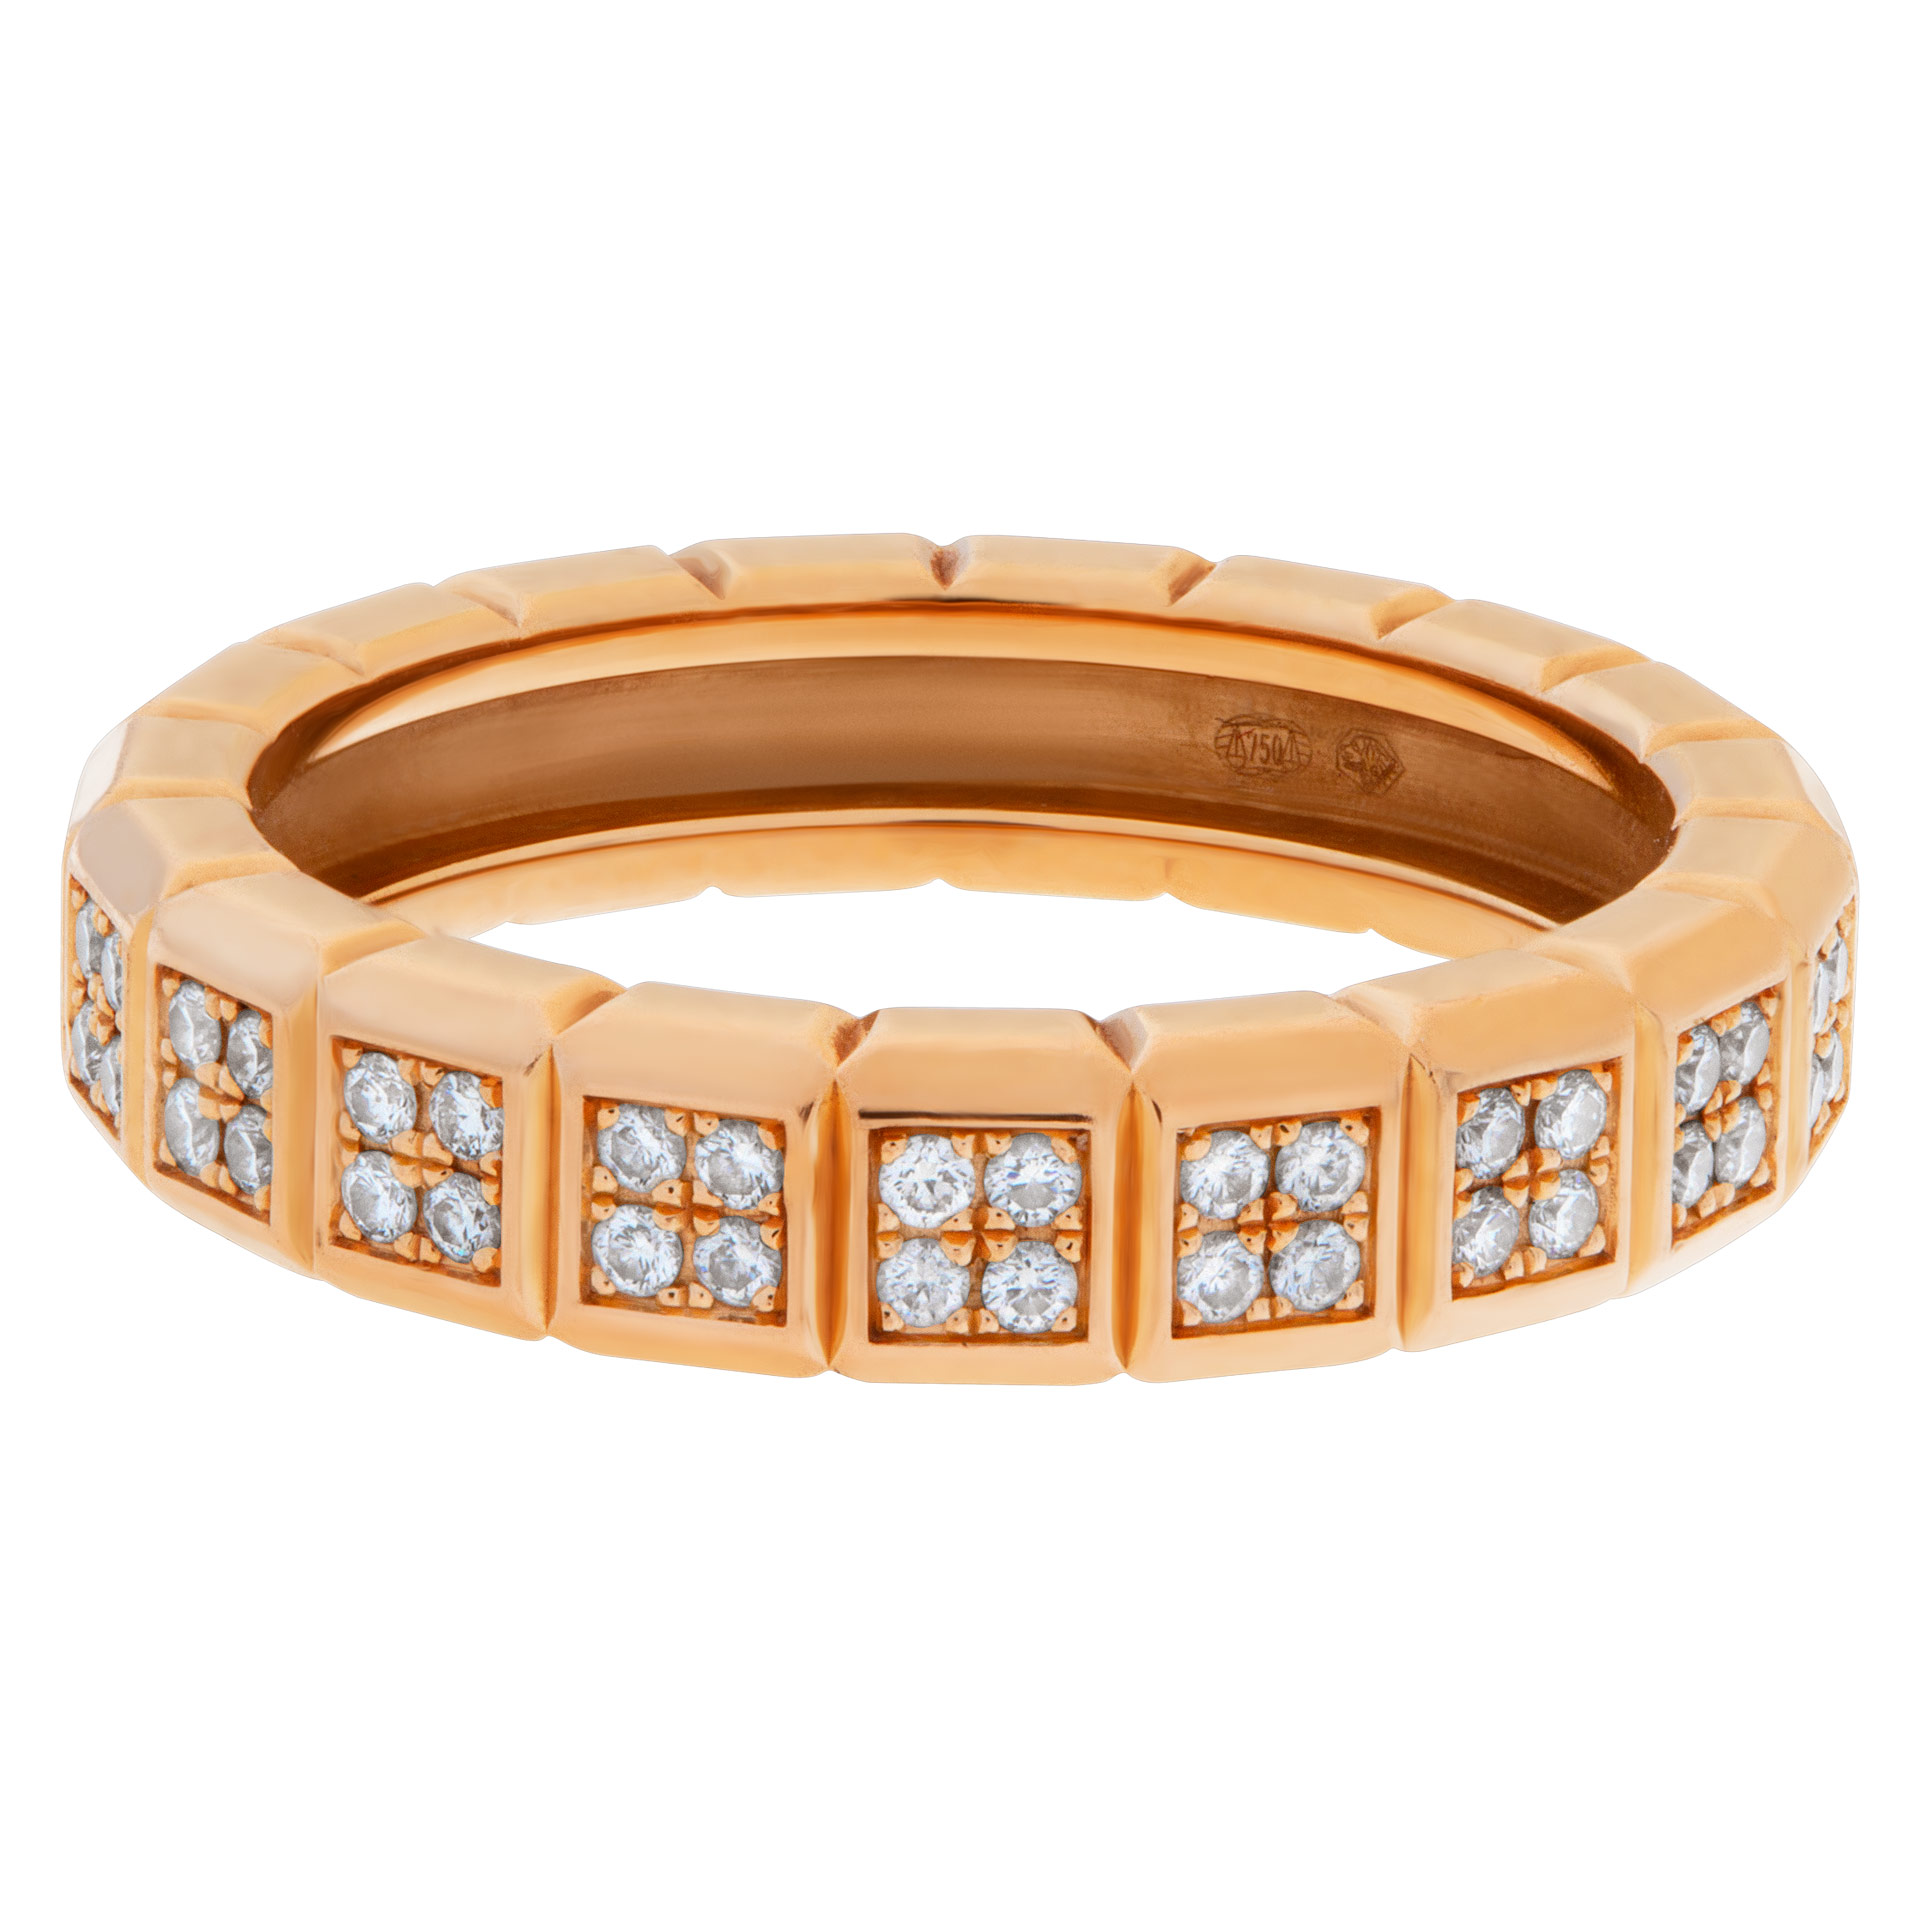 Chopard "Ice Cube Pure" eternity ring in 18k rose gold with diamonds.0.45 carat (G-VS)